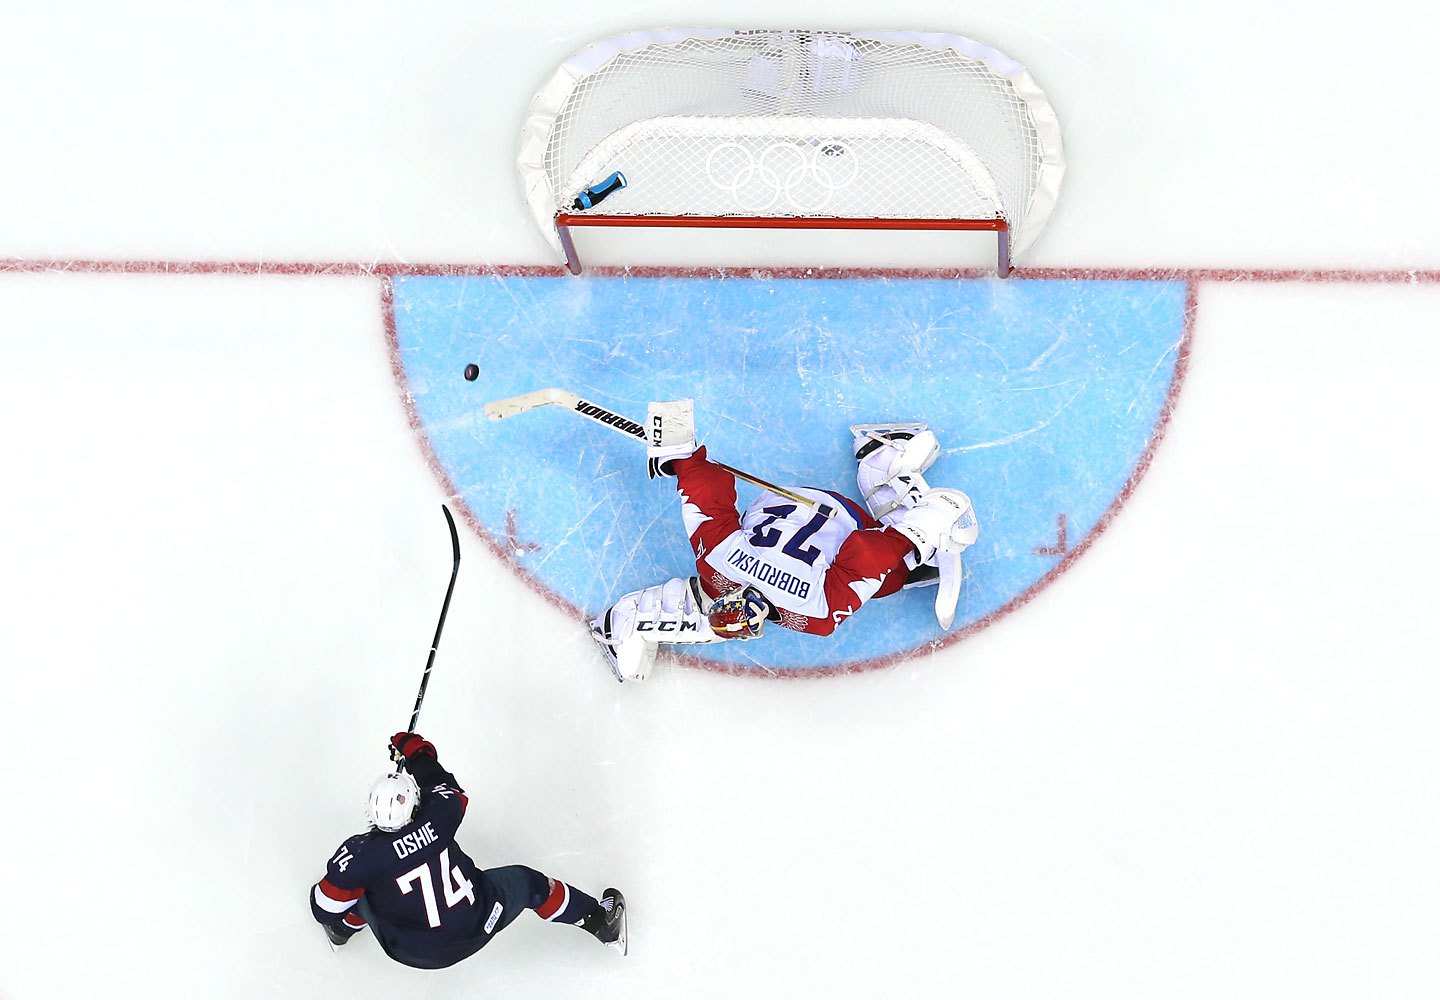 .J. Oshie #74 of the United States shoots during a shootout against Sergei Bobrovski #72 of Russia .